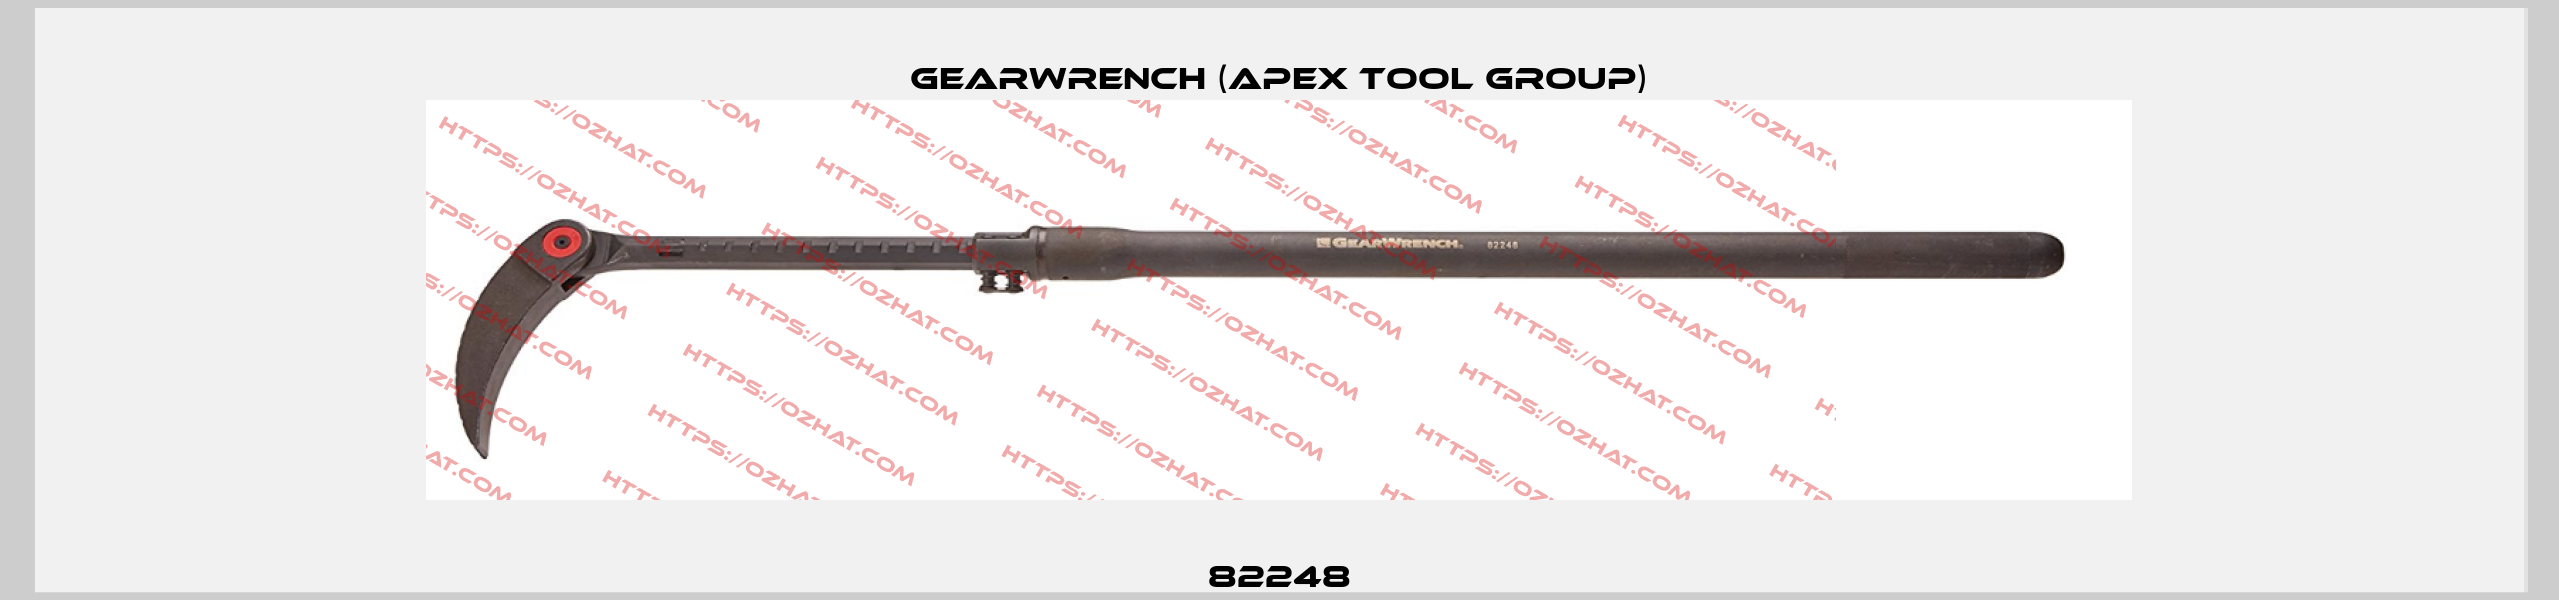 82248 GEARWRENCH (Apex Tool Group)